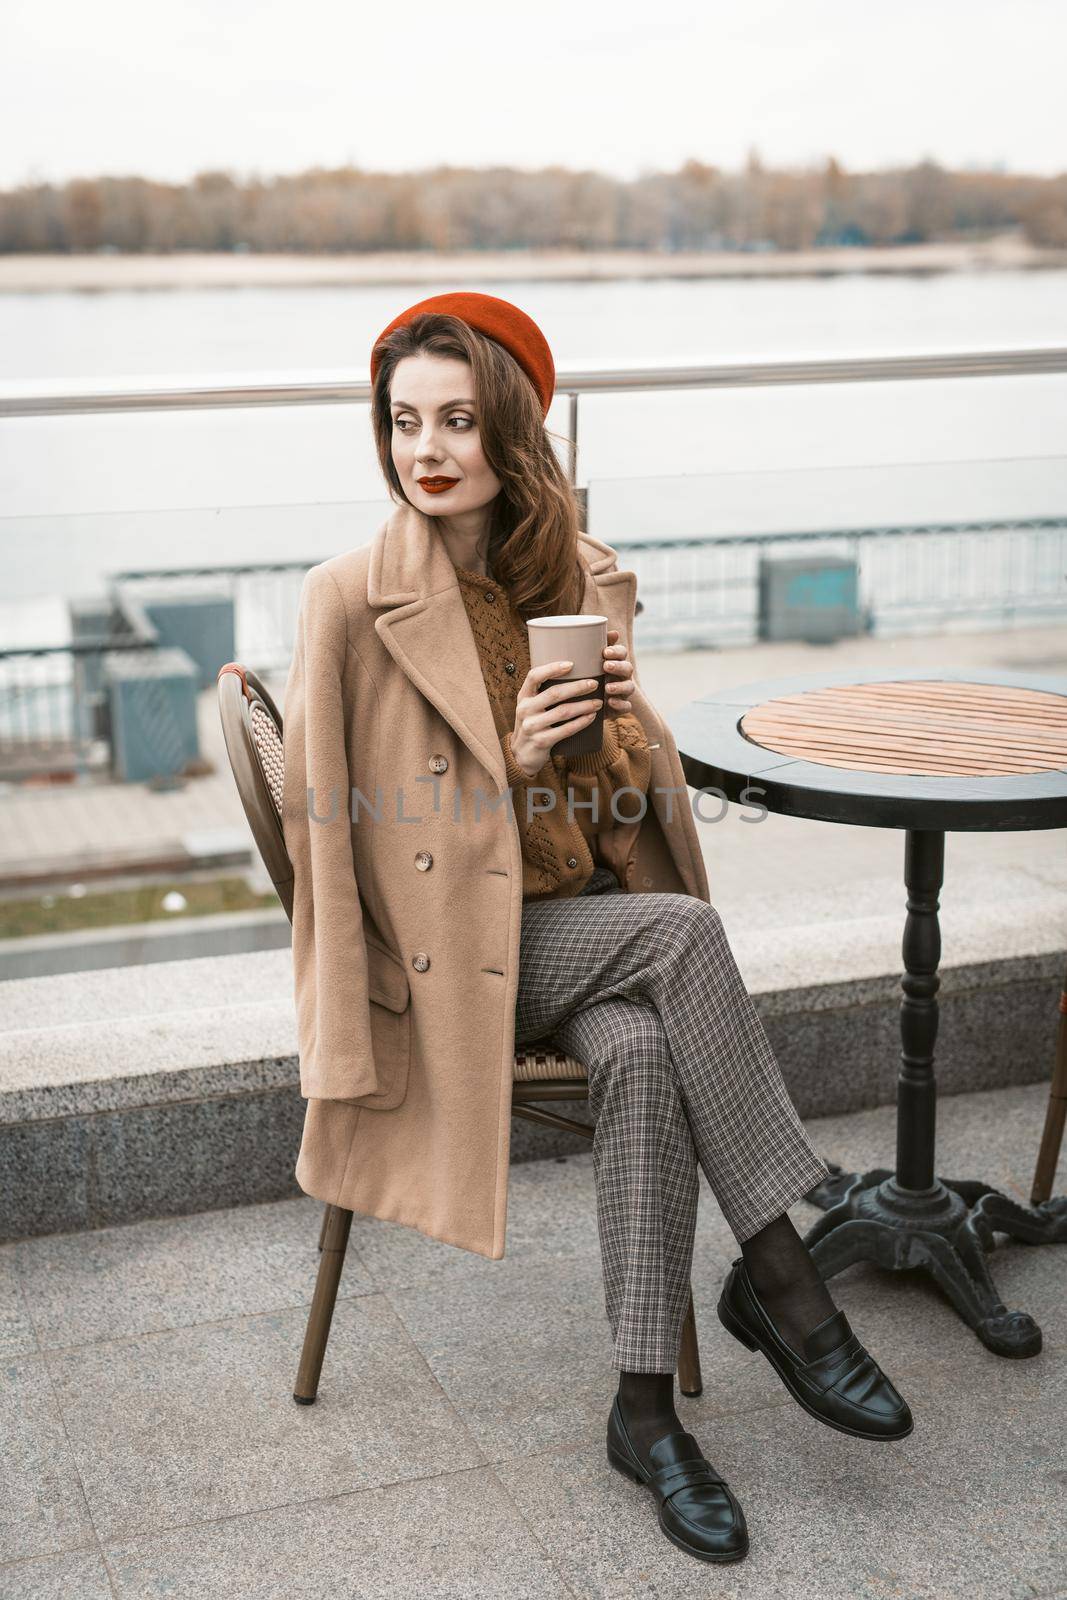 Charming young woman having a coffee sitting at empty restaurant terrace holding a coffee mug, wearing red beret. Autumn urban city on background. 